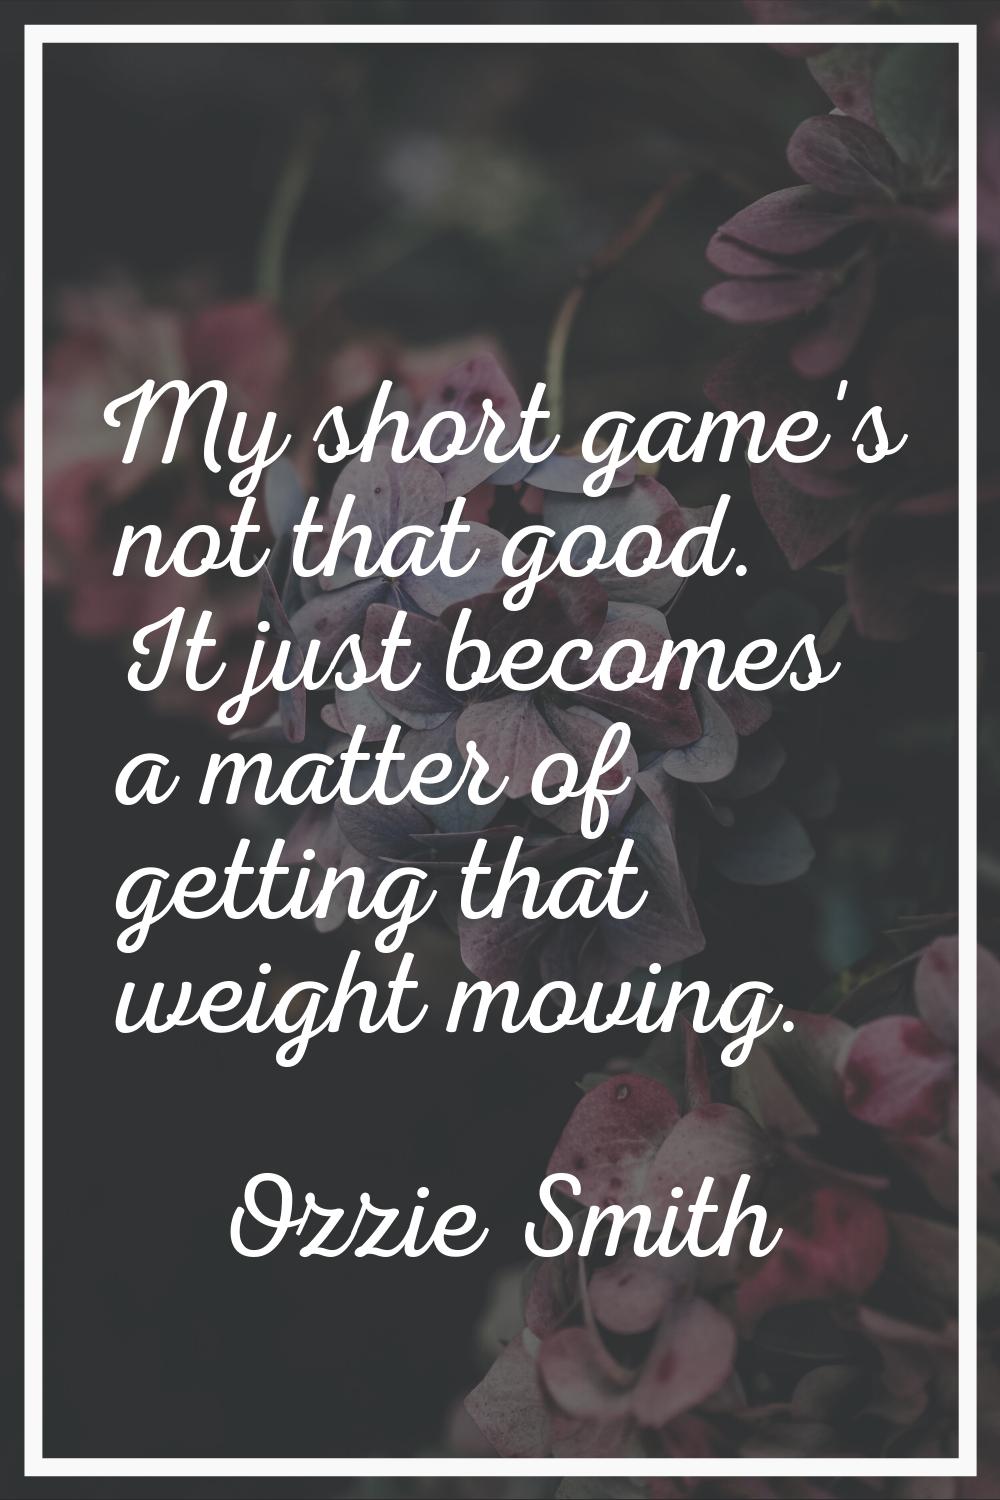 My short game's not that good. It just becomes a matter of getting that weight moving.